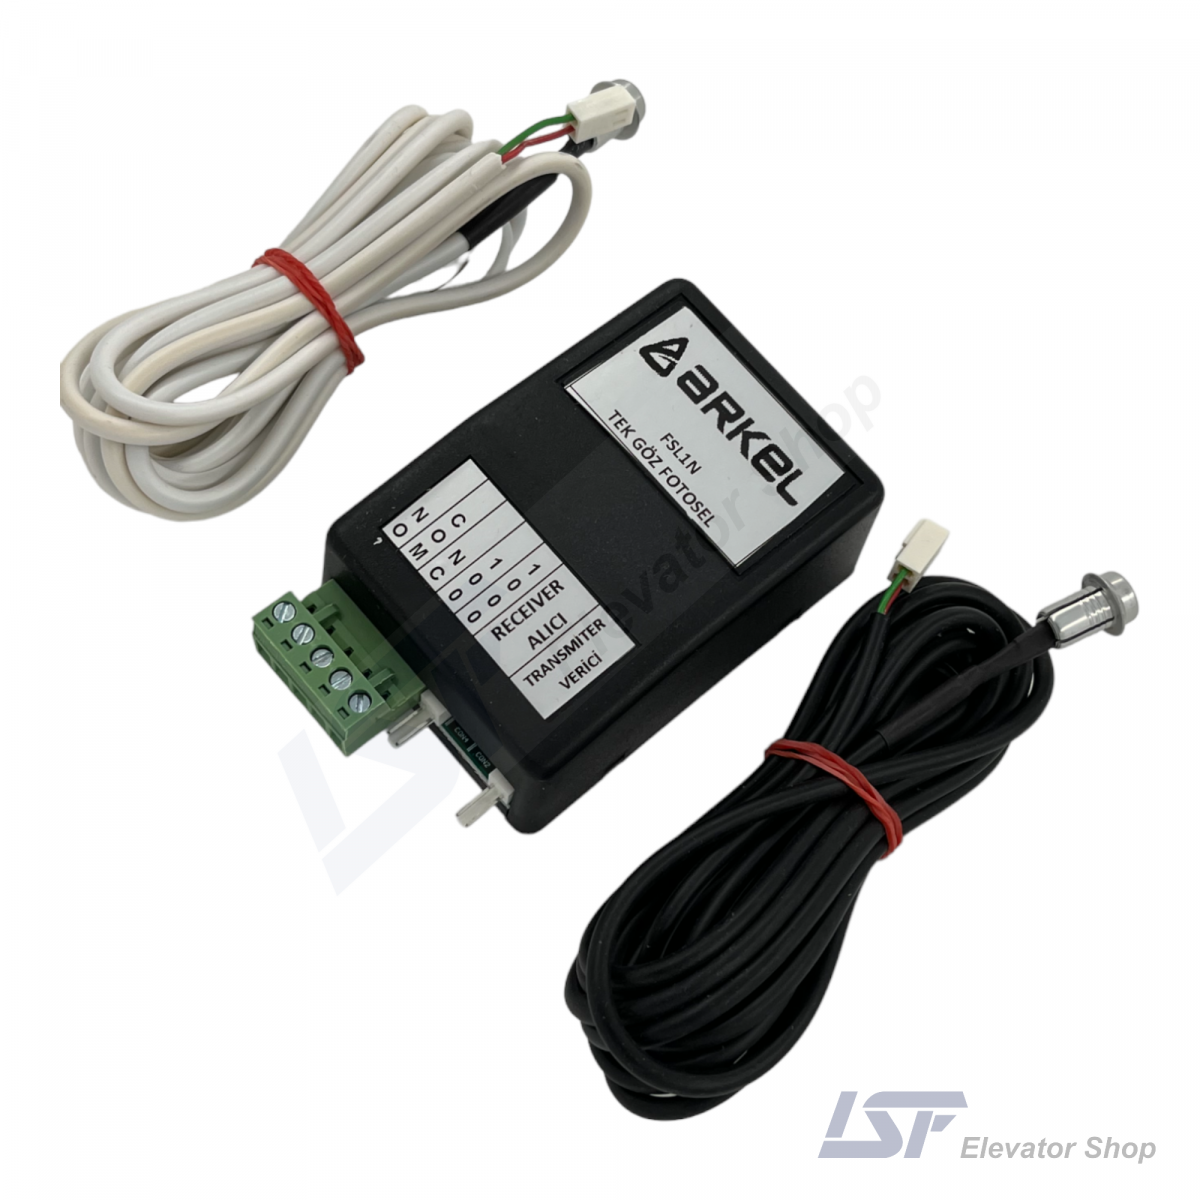 Arkel FSL-1NF Photocell With One Sensor (3)